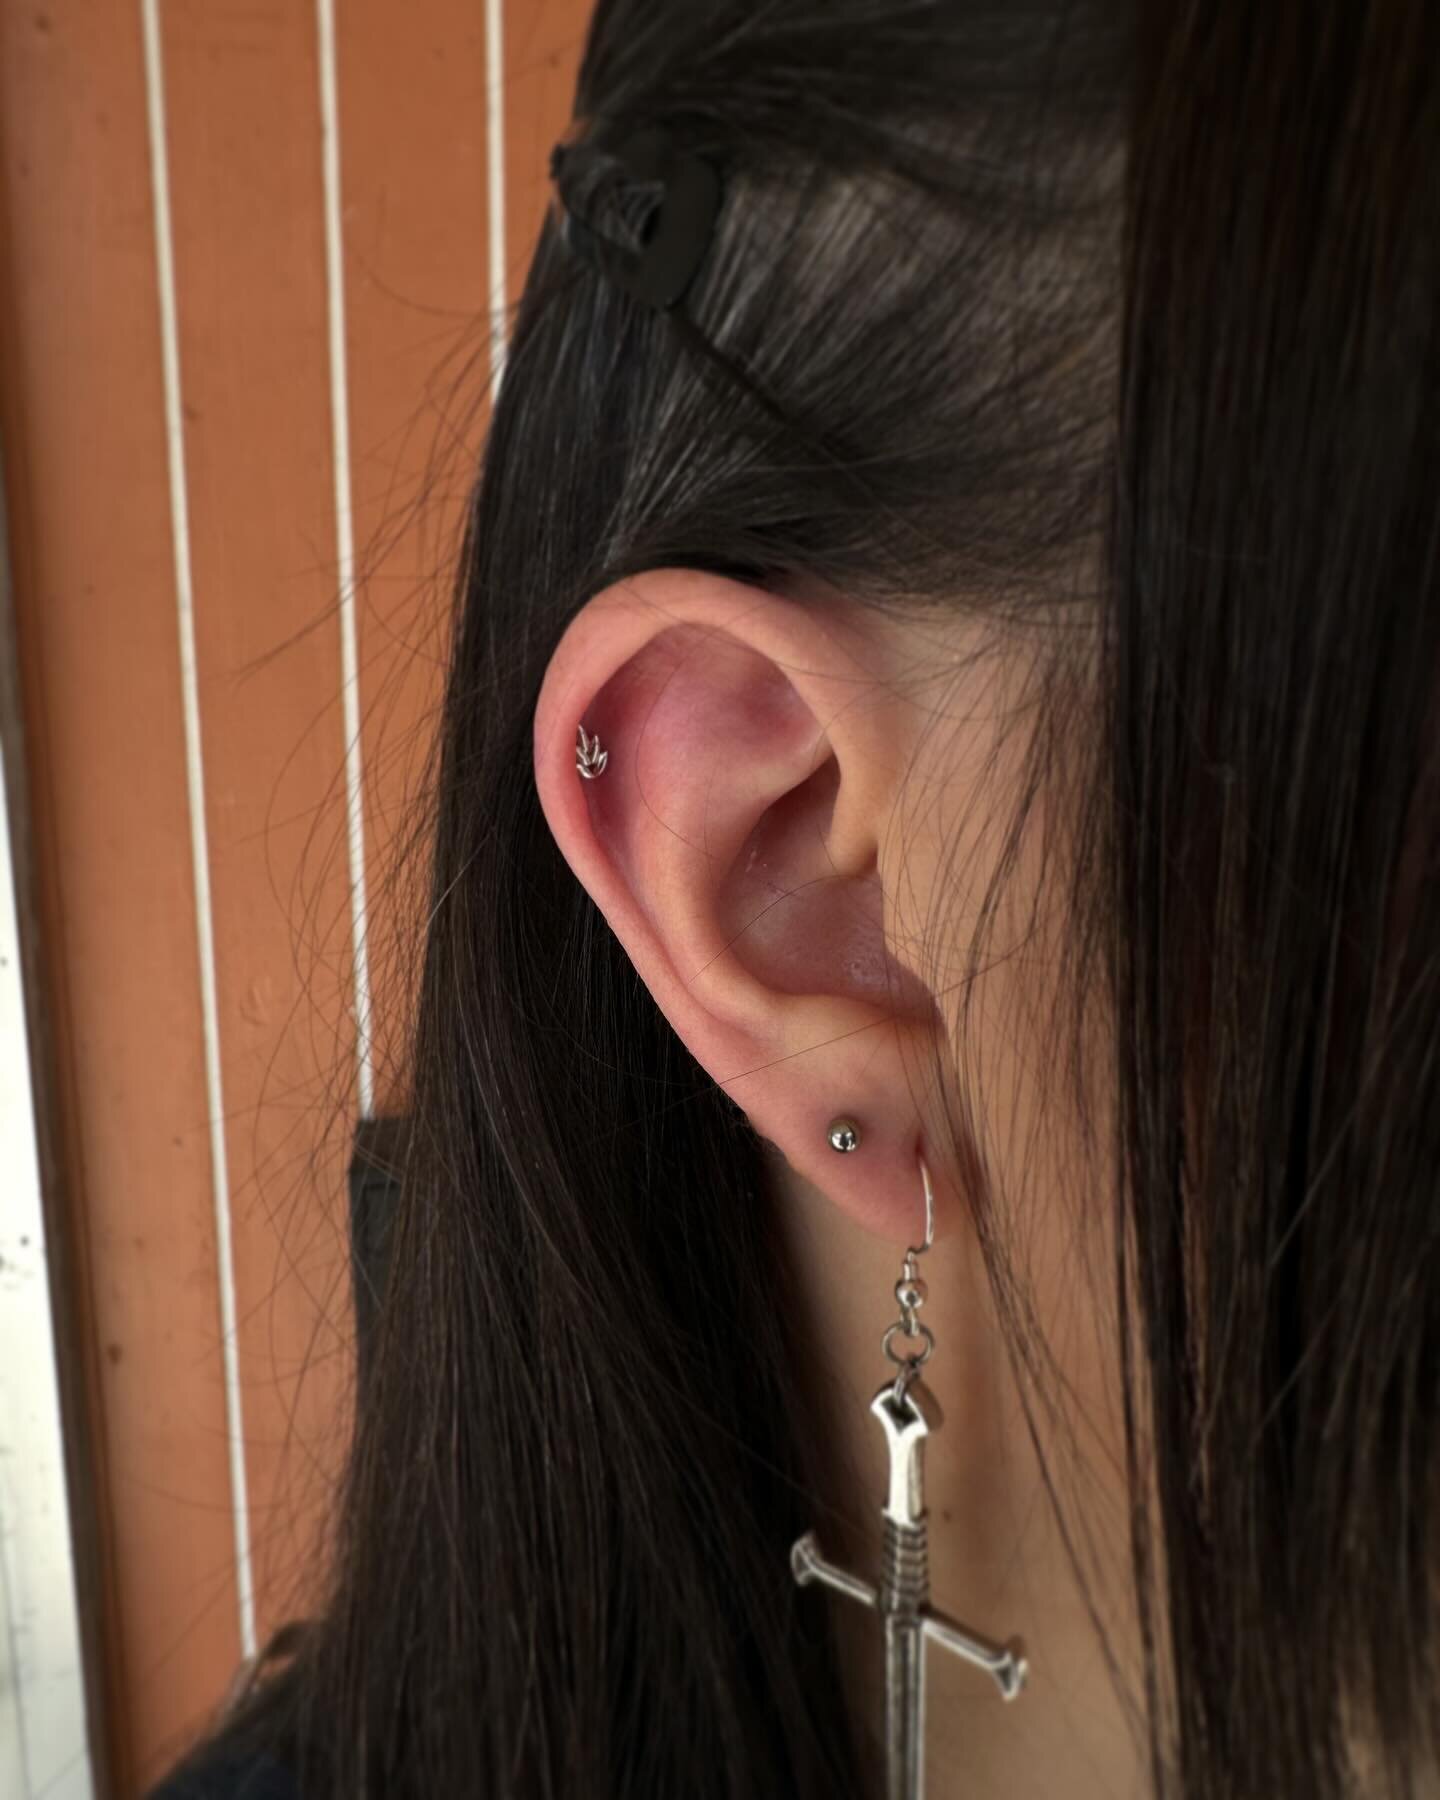 My buddies came in to see me today to add some new jewelry :-) fresh helix rockin&rsquo; a 14kt white gold Fernanda from @junipurrjewelry and some classic lil F-136 titanium balls in the new 2nd lobes